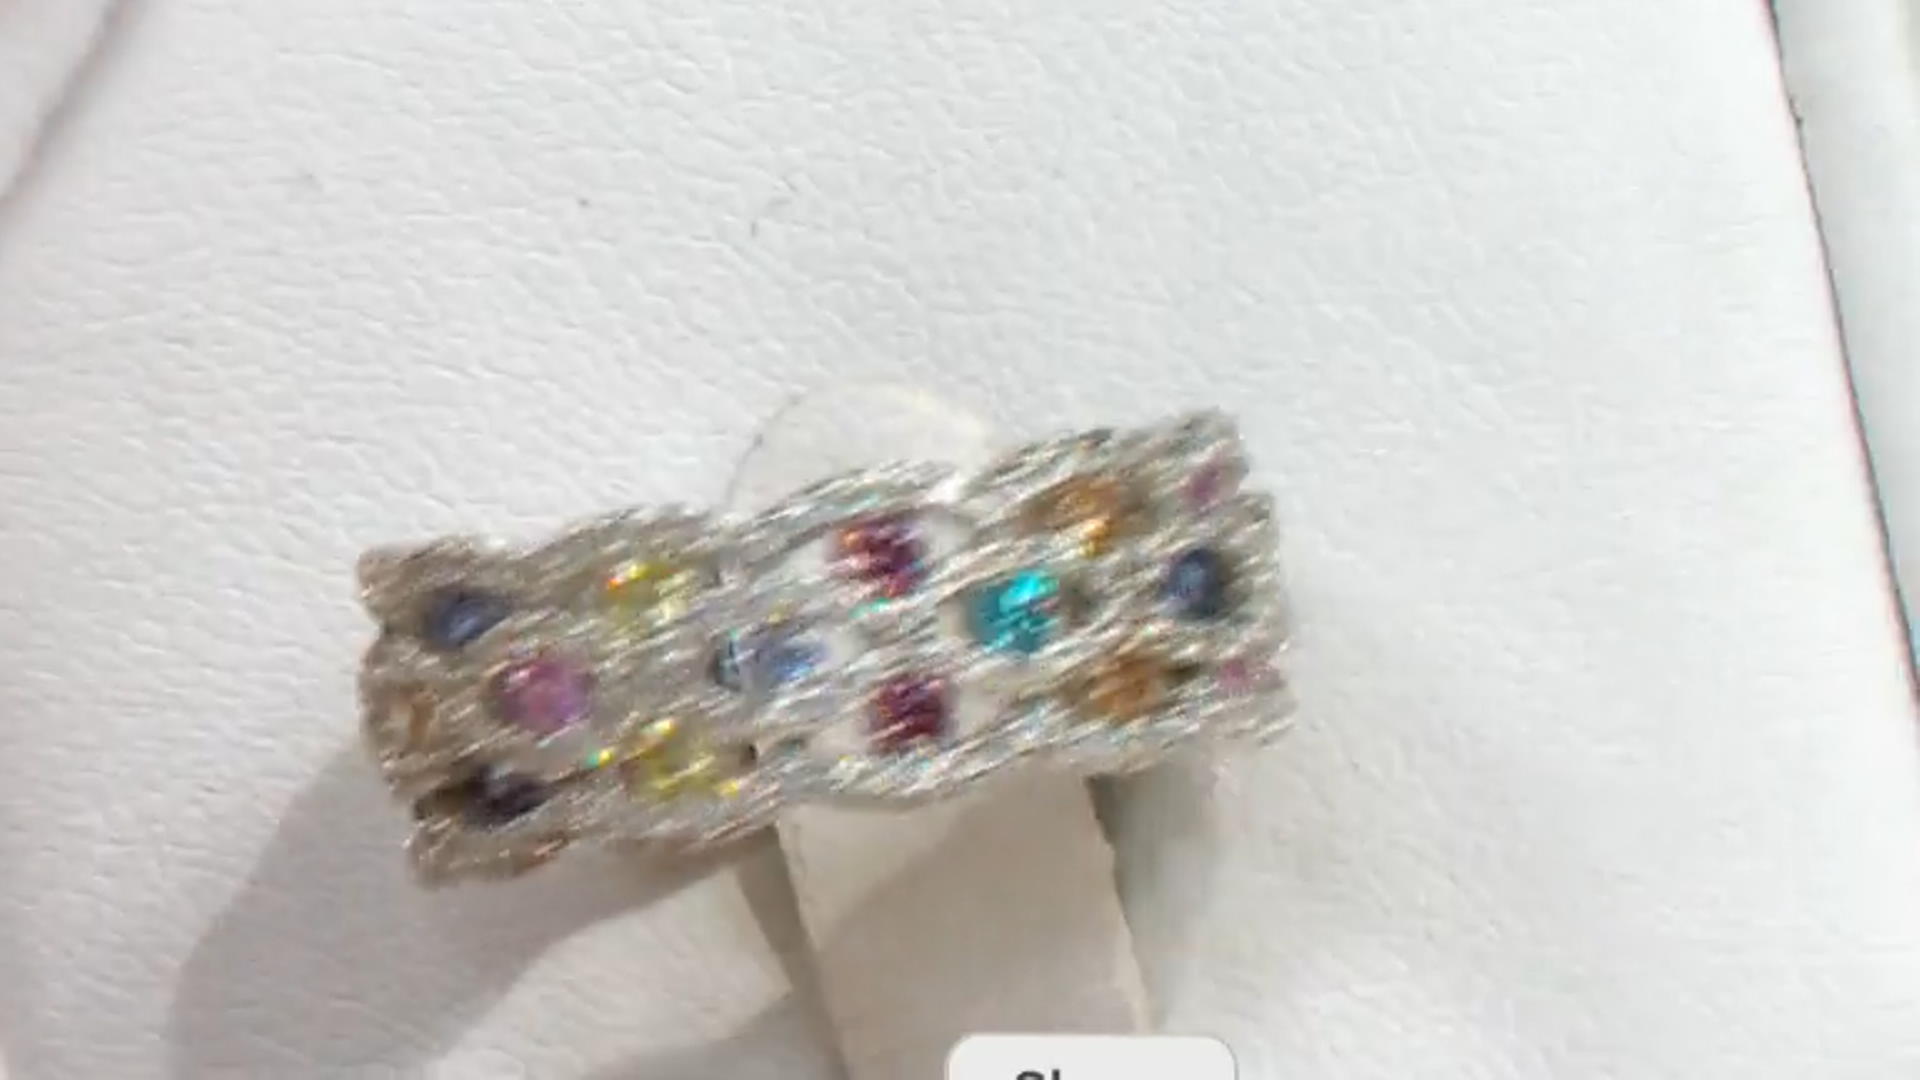 White, Lavender, Yellow Pink, Brown, Mocha,& Blue Cubic Zirconia Rhodium Over Silver Ring 4.58ctw Video Thumbnail